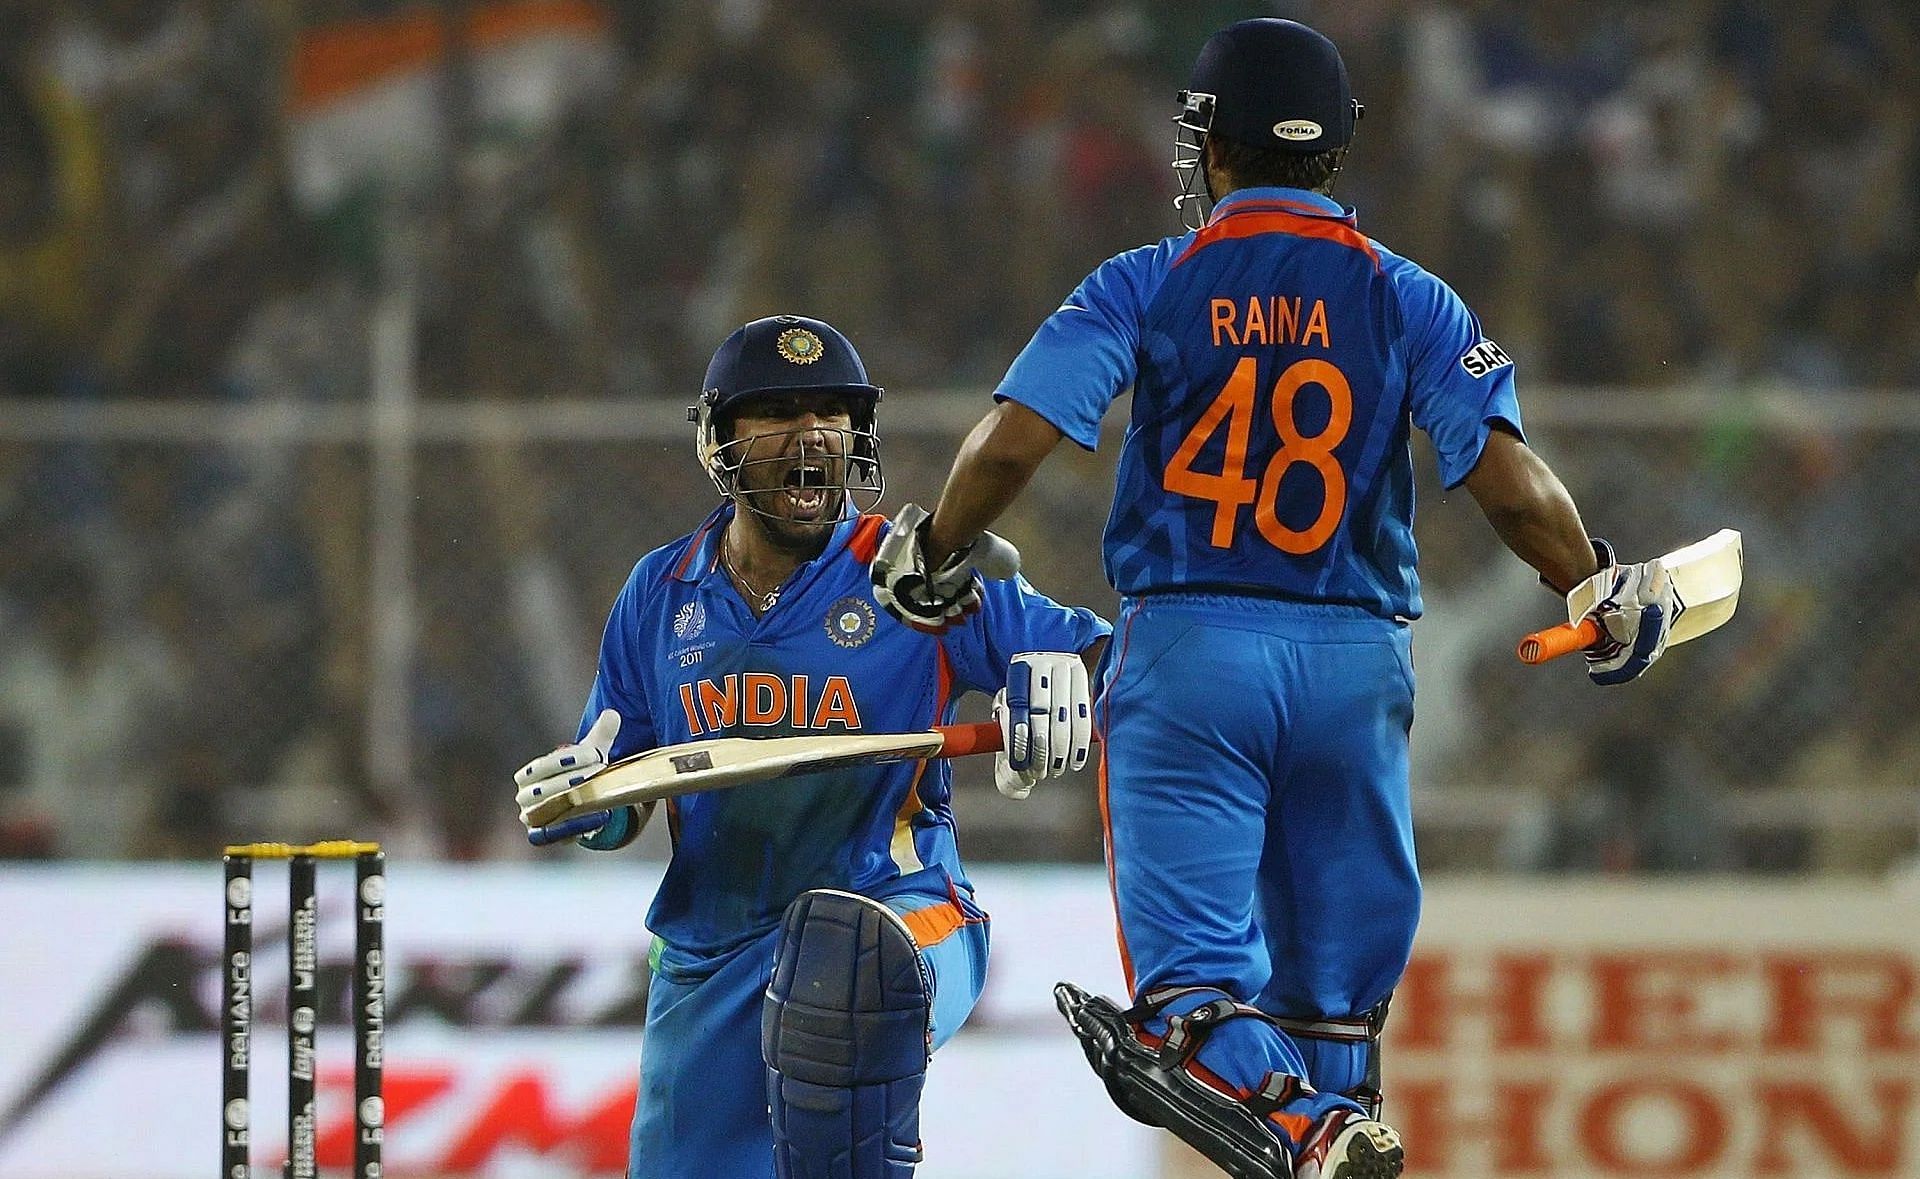 Yuvraj Singh celebrates after hitting the winning runs in the 2011 World Cup quarter-final. (Pic: Getty Images)